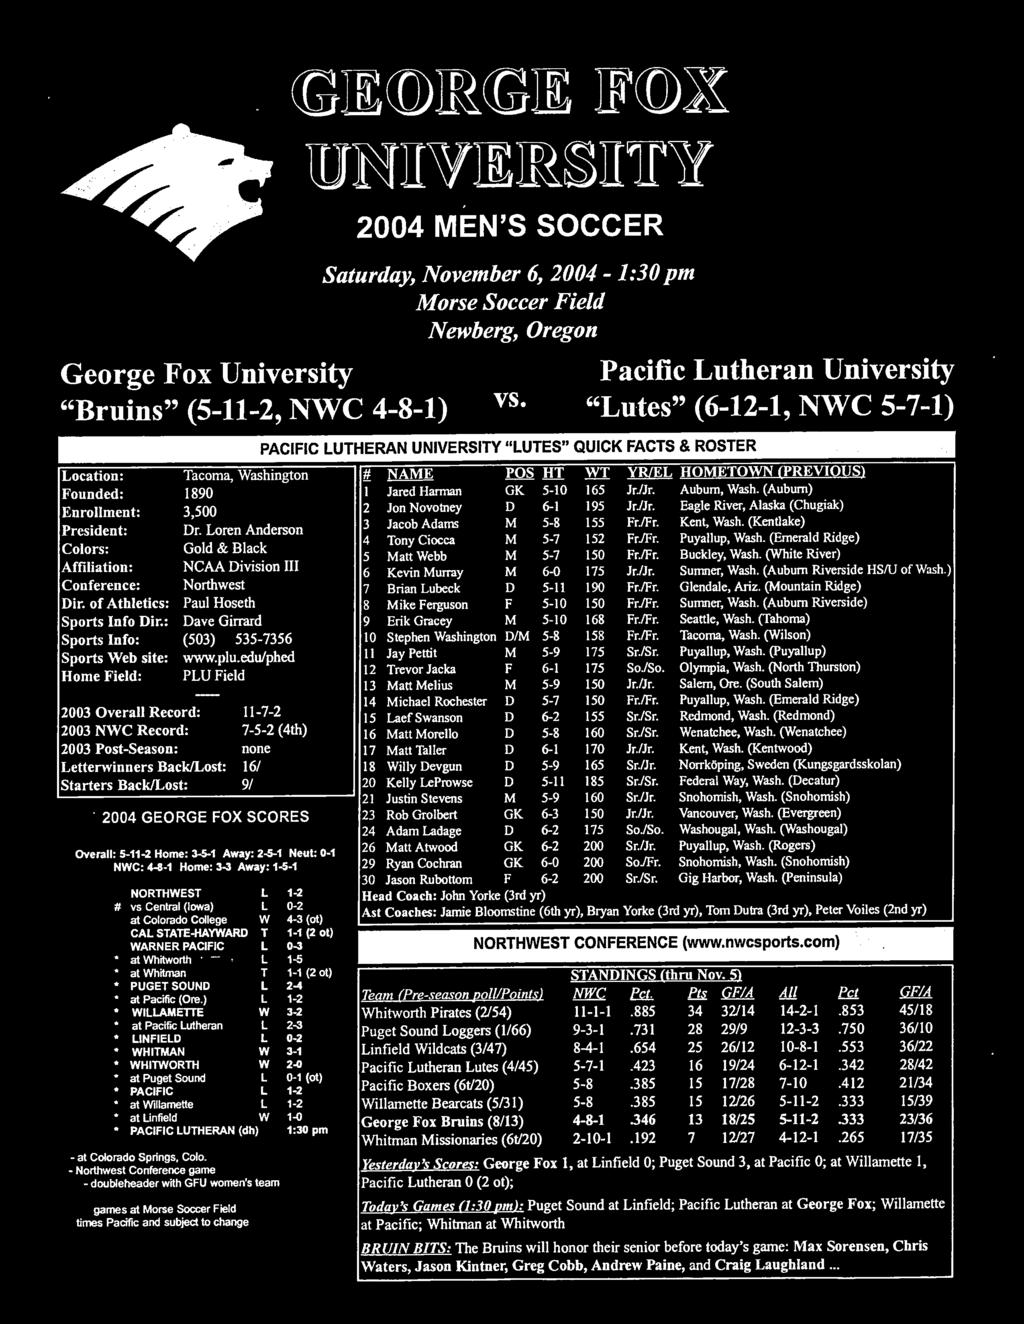 PACIFIC LUTHERAN UNIVERSITY "LUTES" QUICK FACTS & ROSTER -7-7-5- (th) none 6/ 9 GEORGE FOX SCORES Overall: 5-- Home: -5- Away: -5- Neut: - NWC: ~ - Home: - Away: -5-9// NORTHWEST L - 9// # vs Central